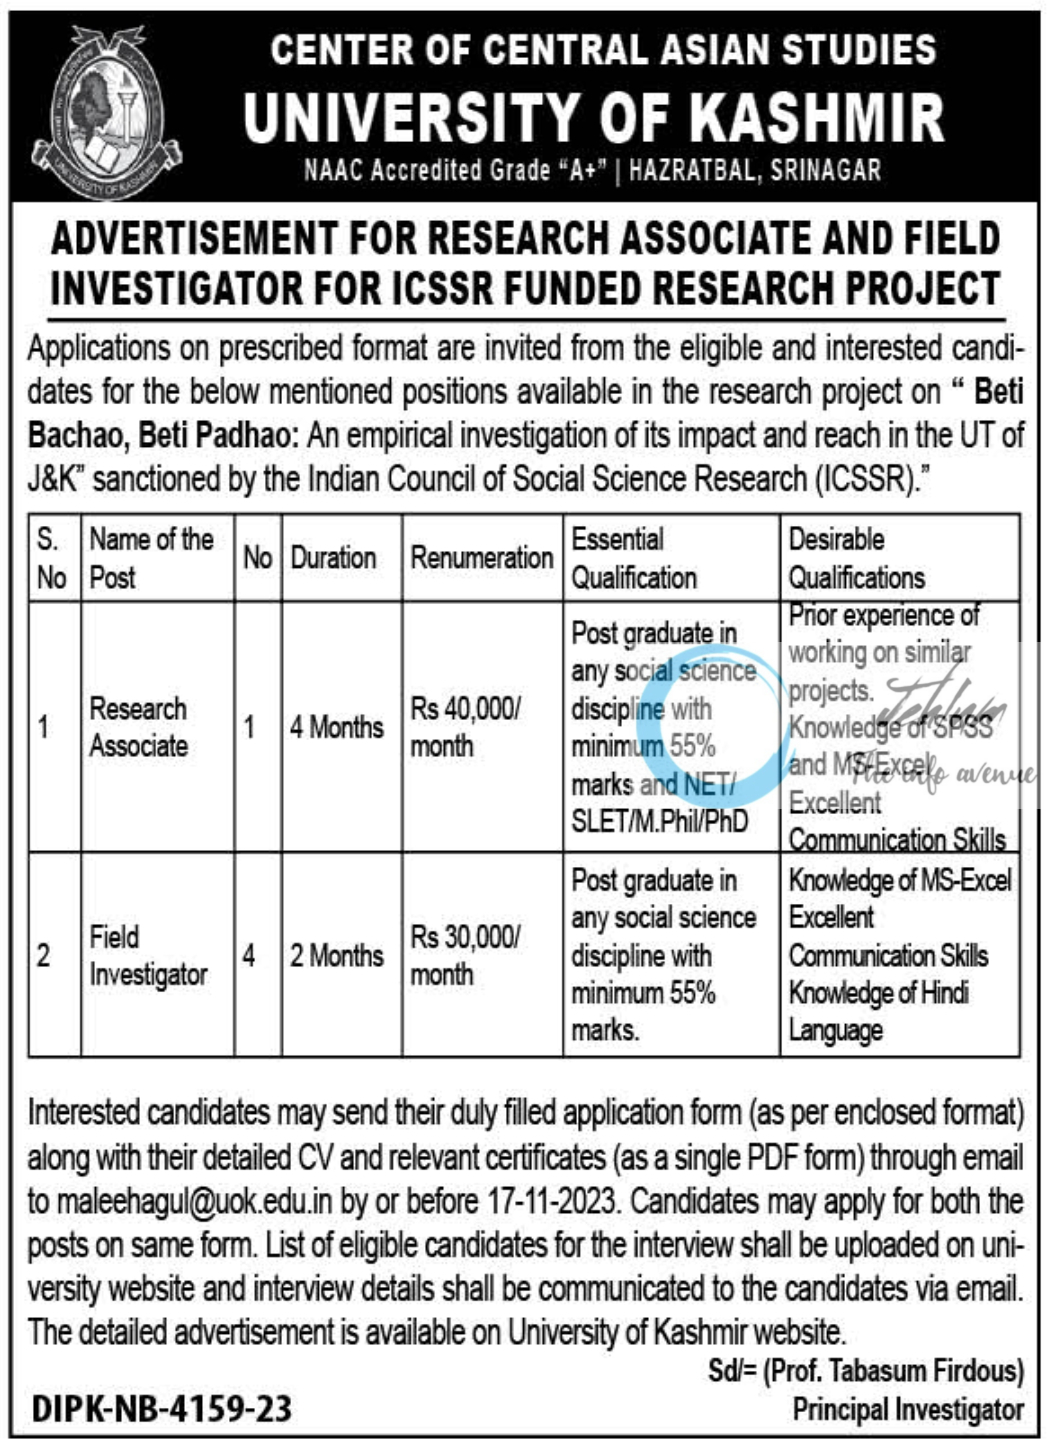 UNIVERSITY OF KASHMIR CENTER OF CENTRAL ASIAN STUDIES ICSSR FUNDED RESEARCH PROJECT ADVERTISEMENT NOTICE 2023